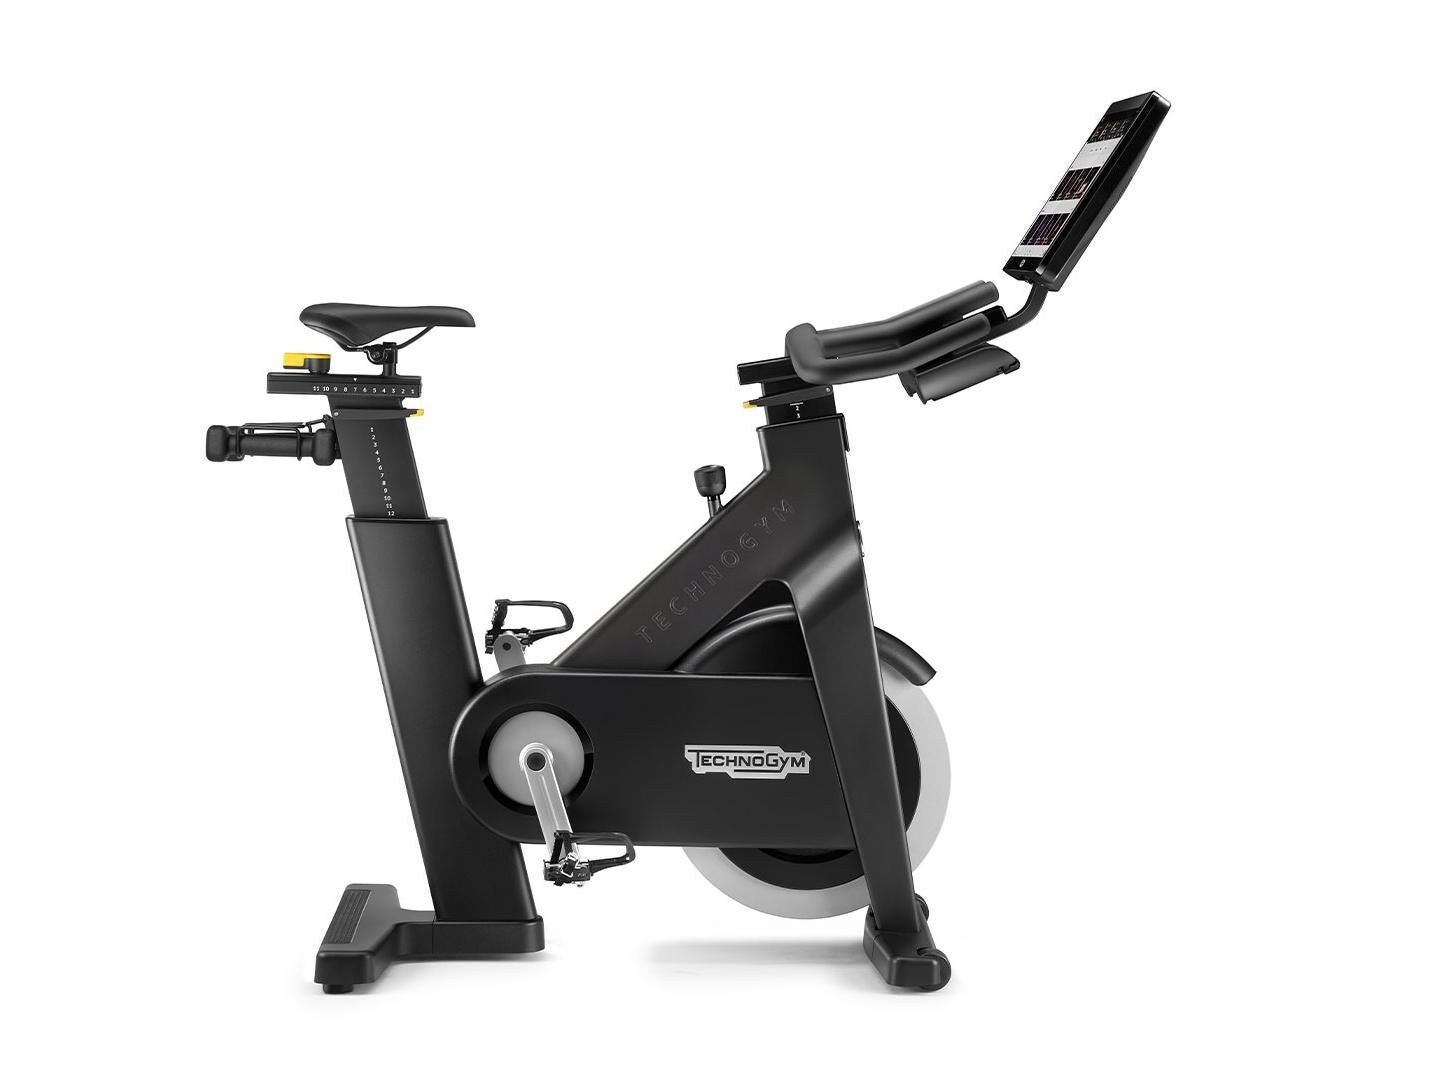 connected exercise bike